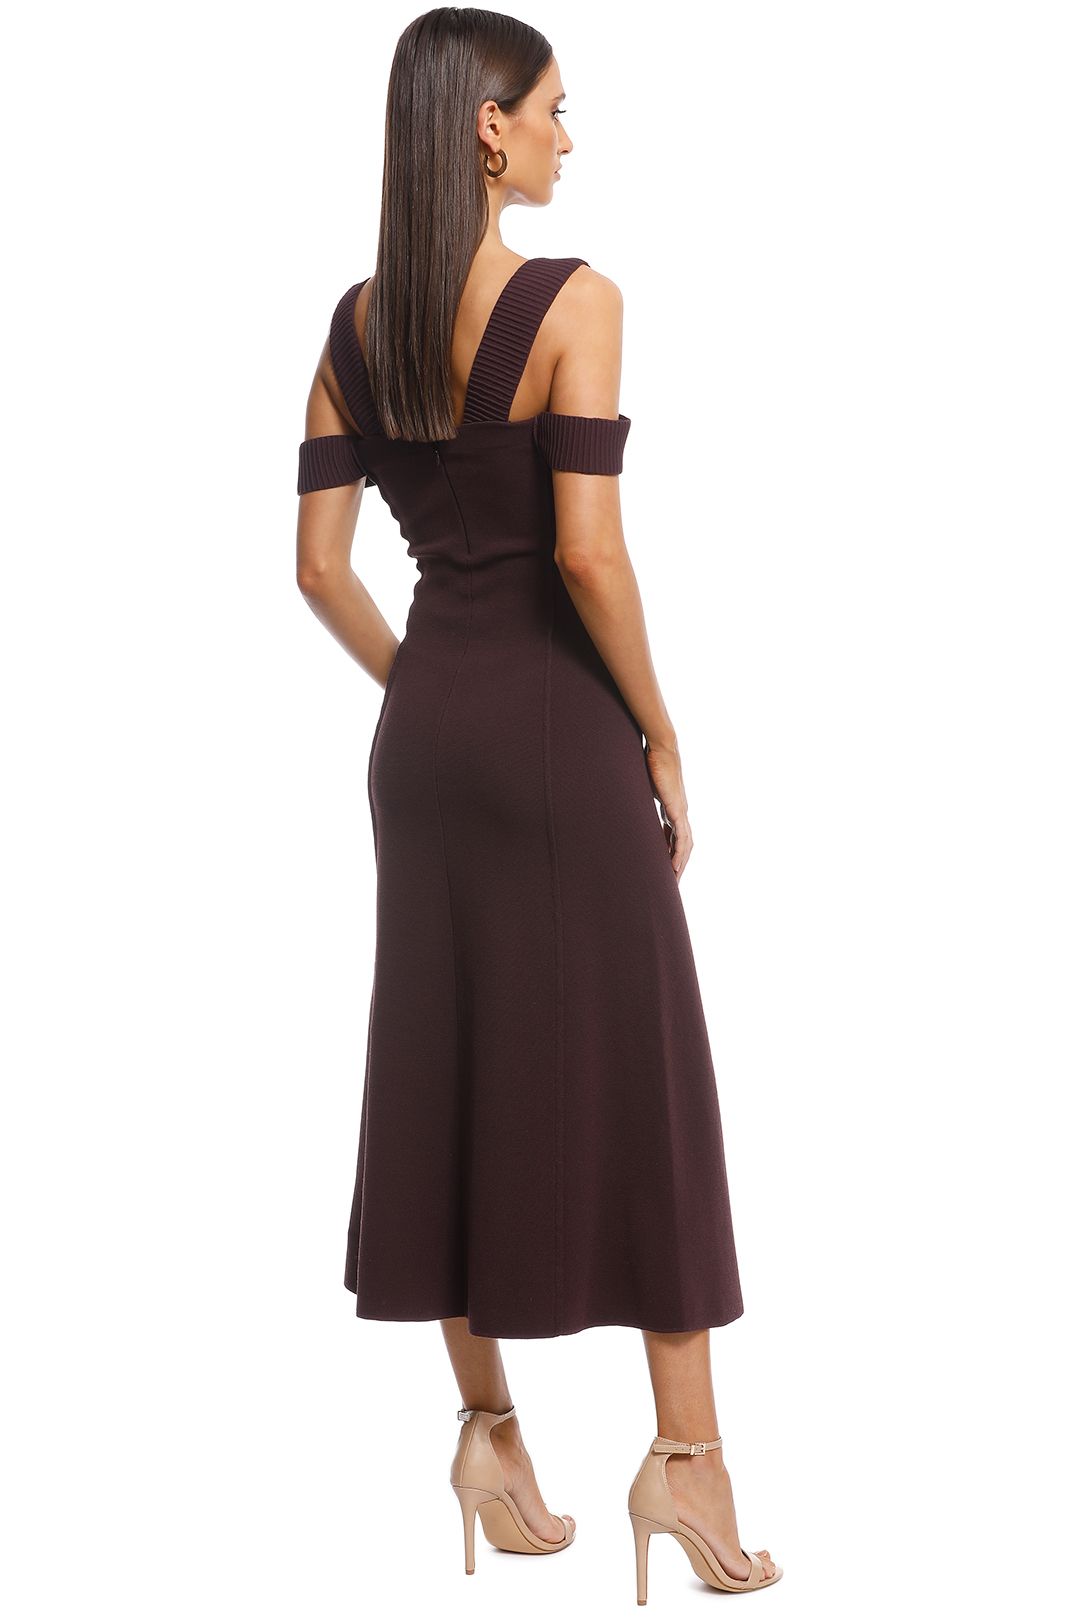 Camilla and Marc - Carole Fit and Flare Midi Dress - Burgundy - Back